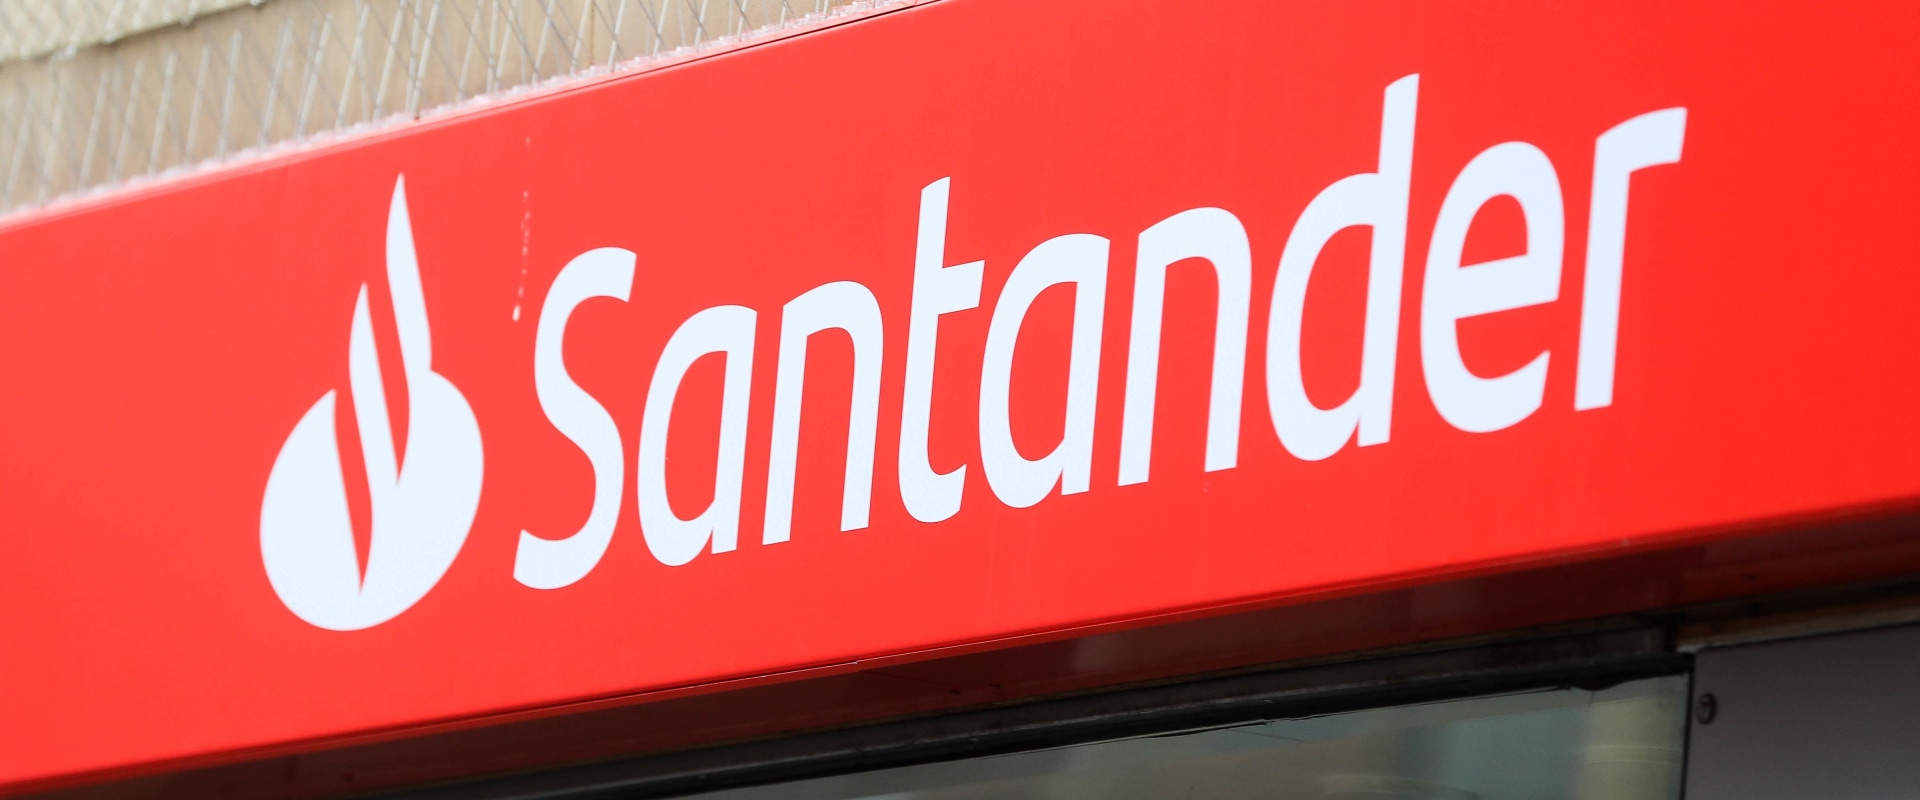 Santander 5 Year Fixed Rate Mortgage Rates Explained